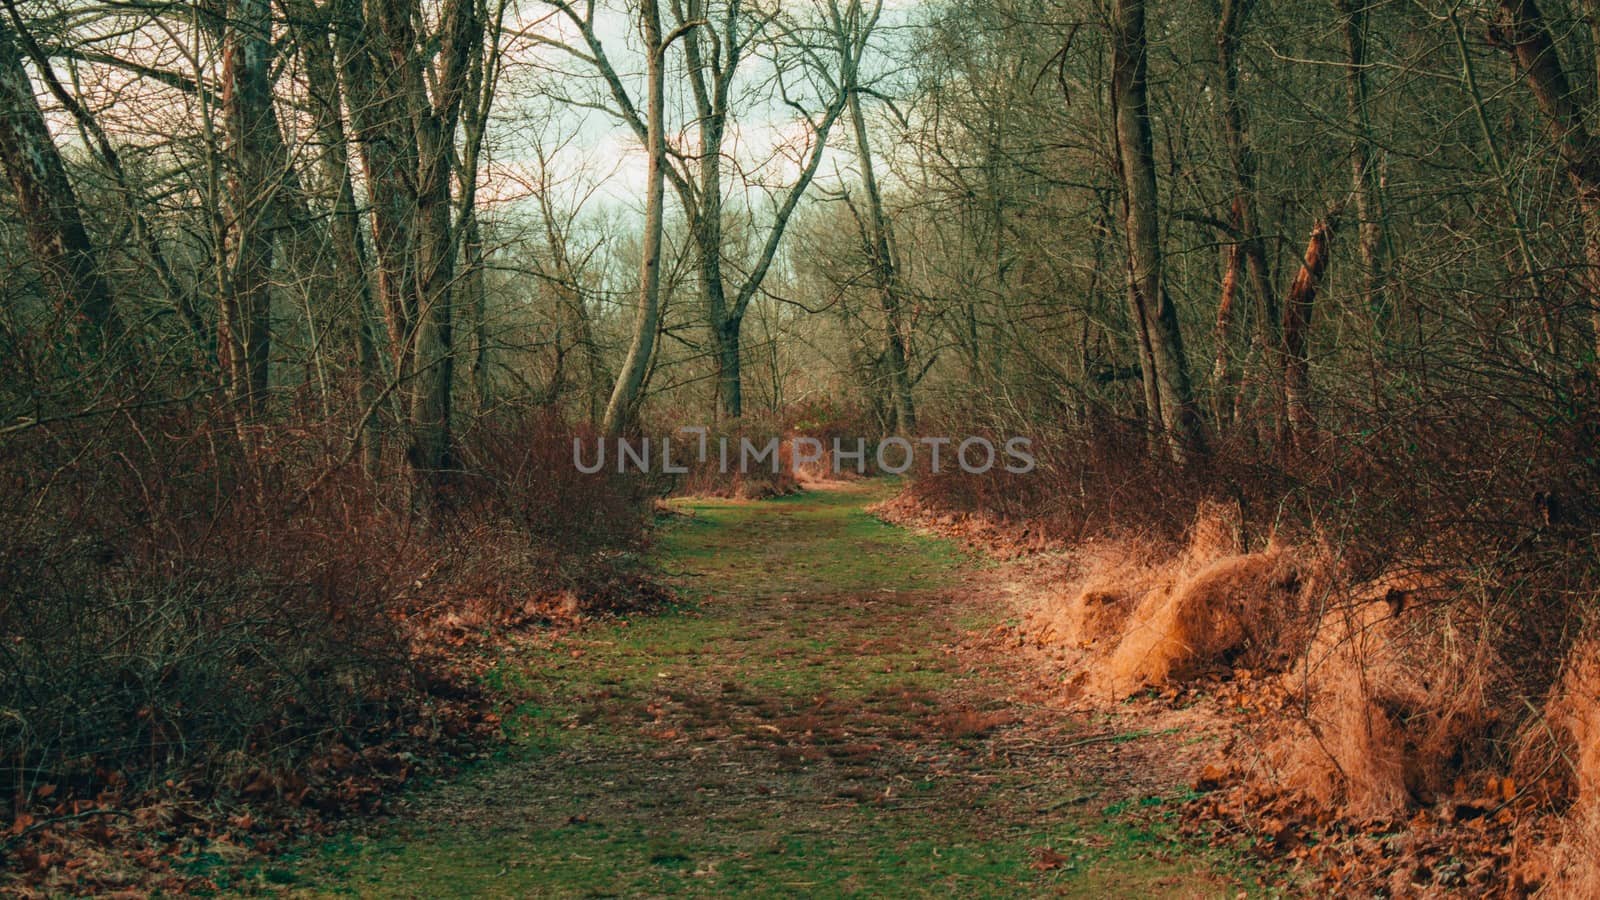 A Grassy Path Overgrown Path Covered in Foliage in a Winter Fore by bju12290